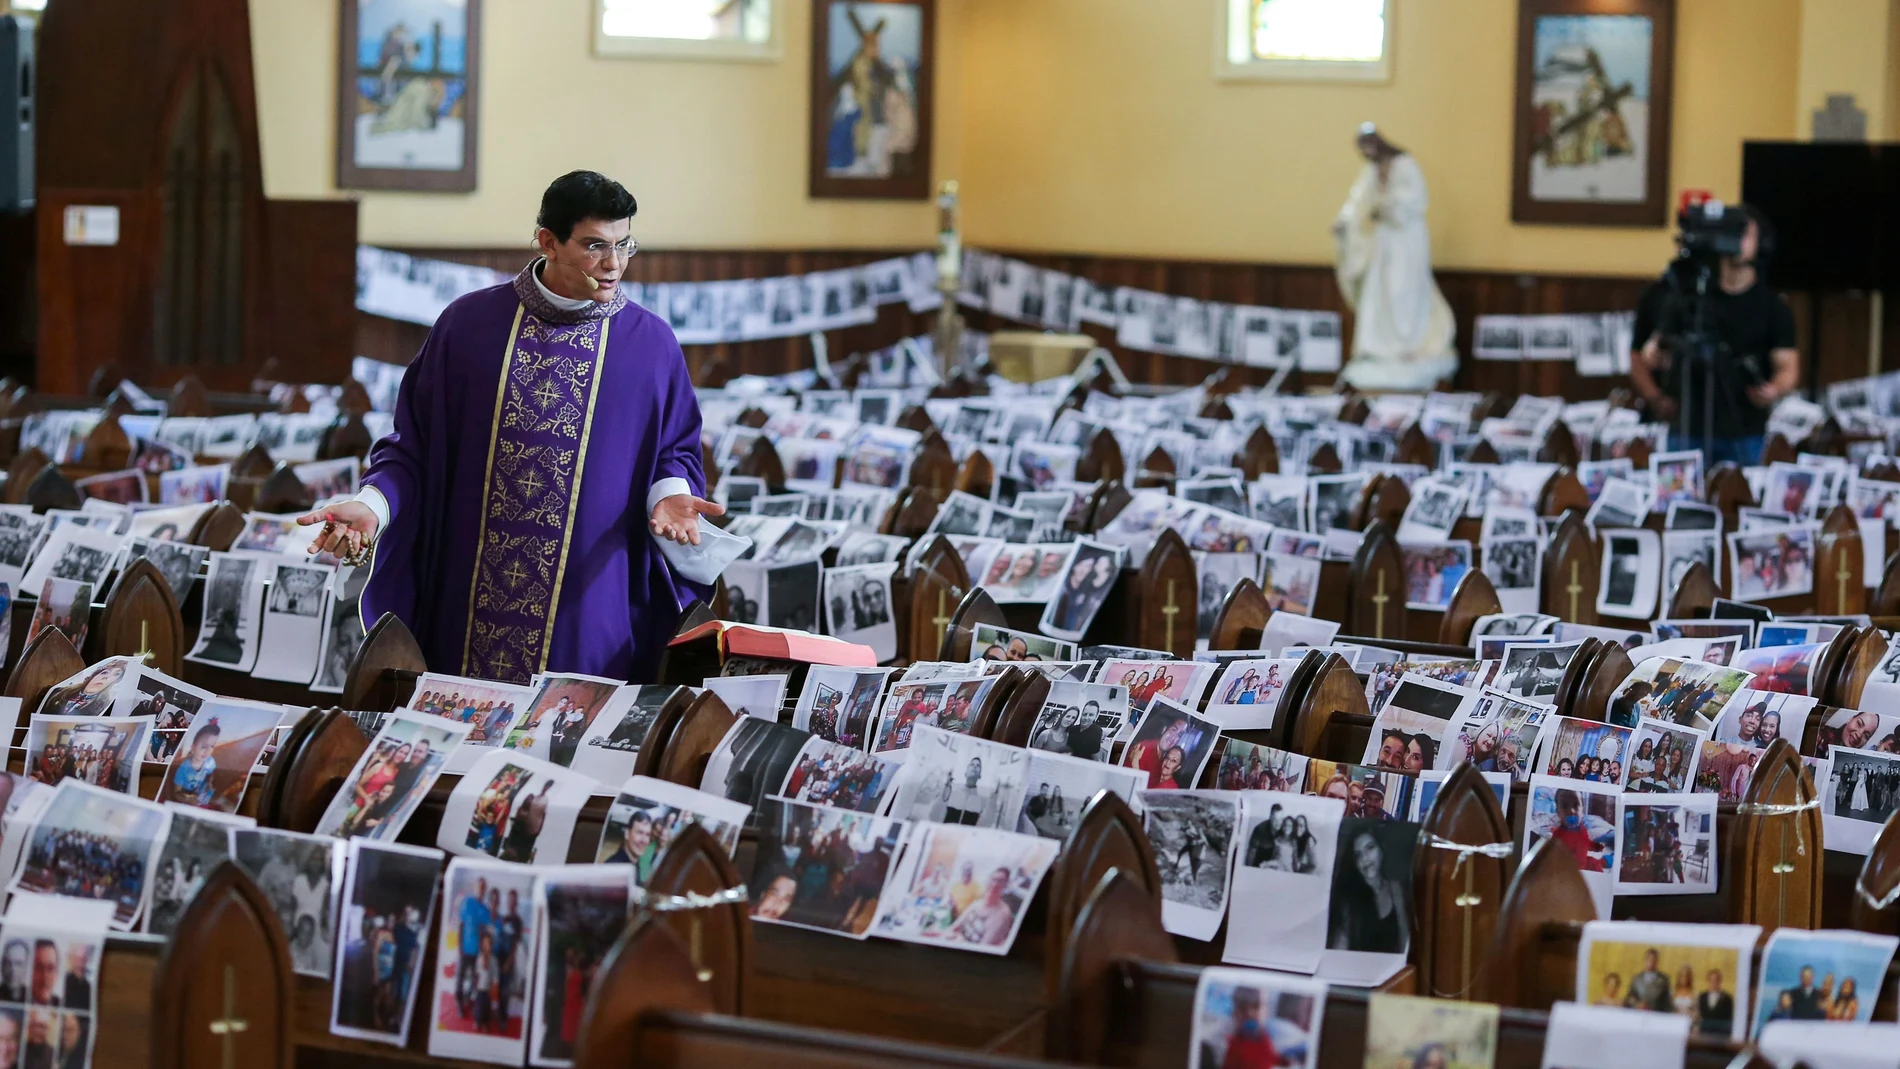 Catholic priest Manzotti conducts a mass, broadcast live on television, with photos of the faithful over the church's banks during the coronavirus disease (COVID-19) outbreak in Curitiba